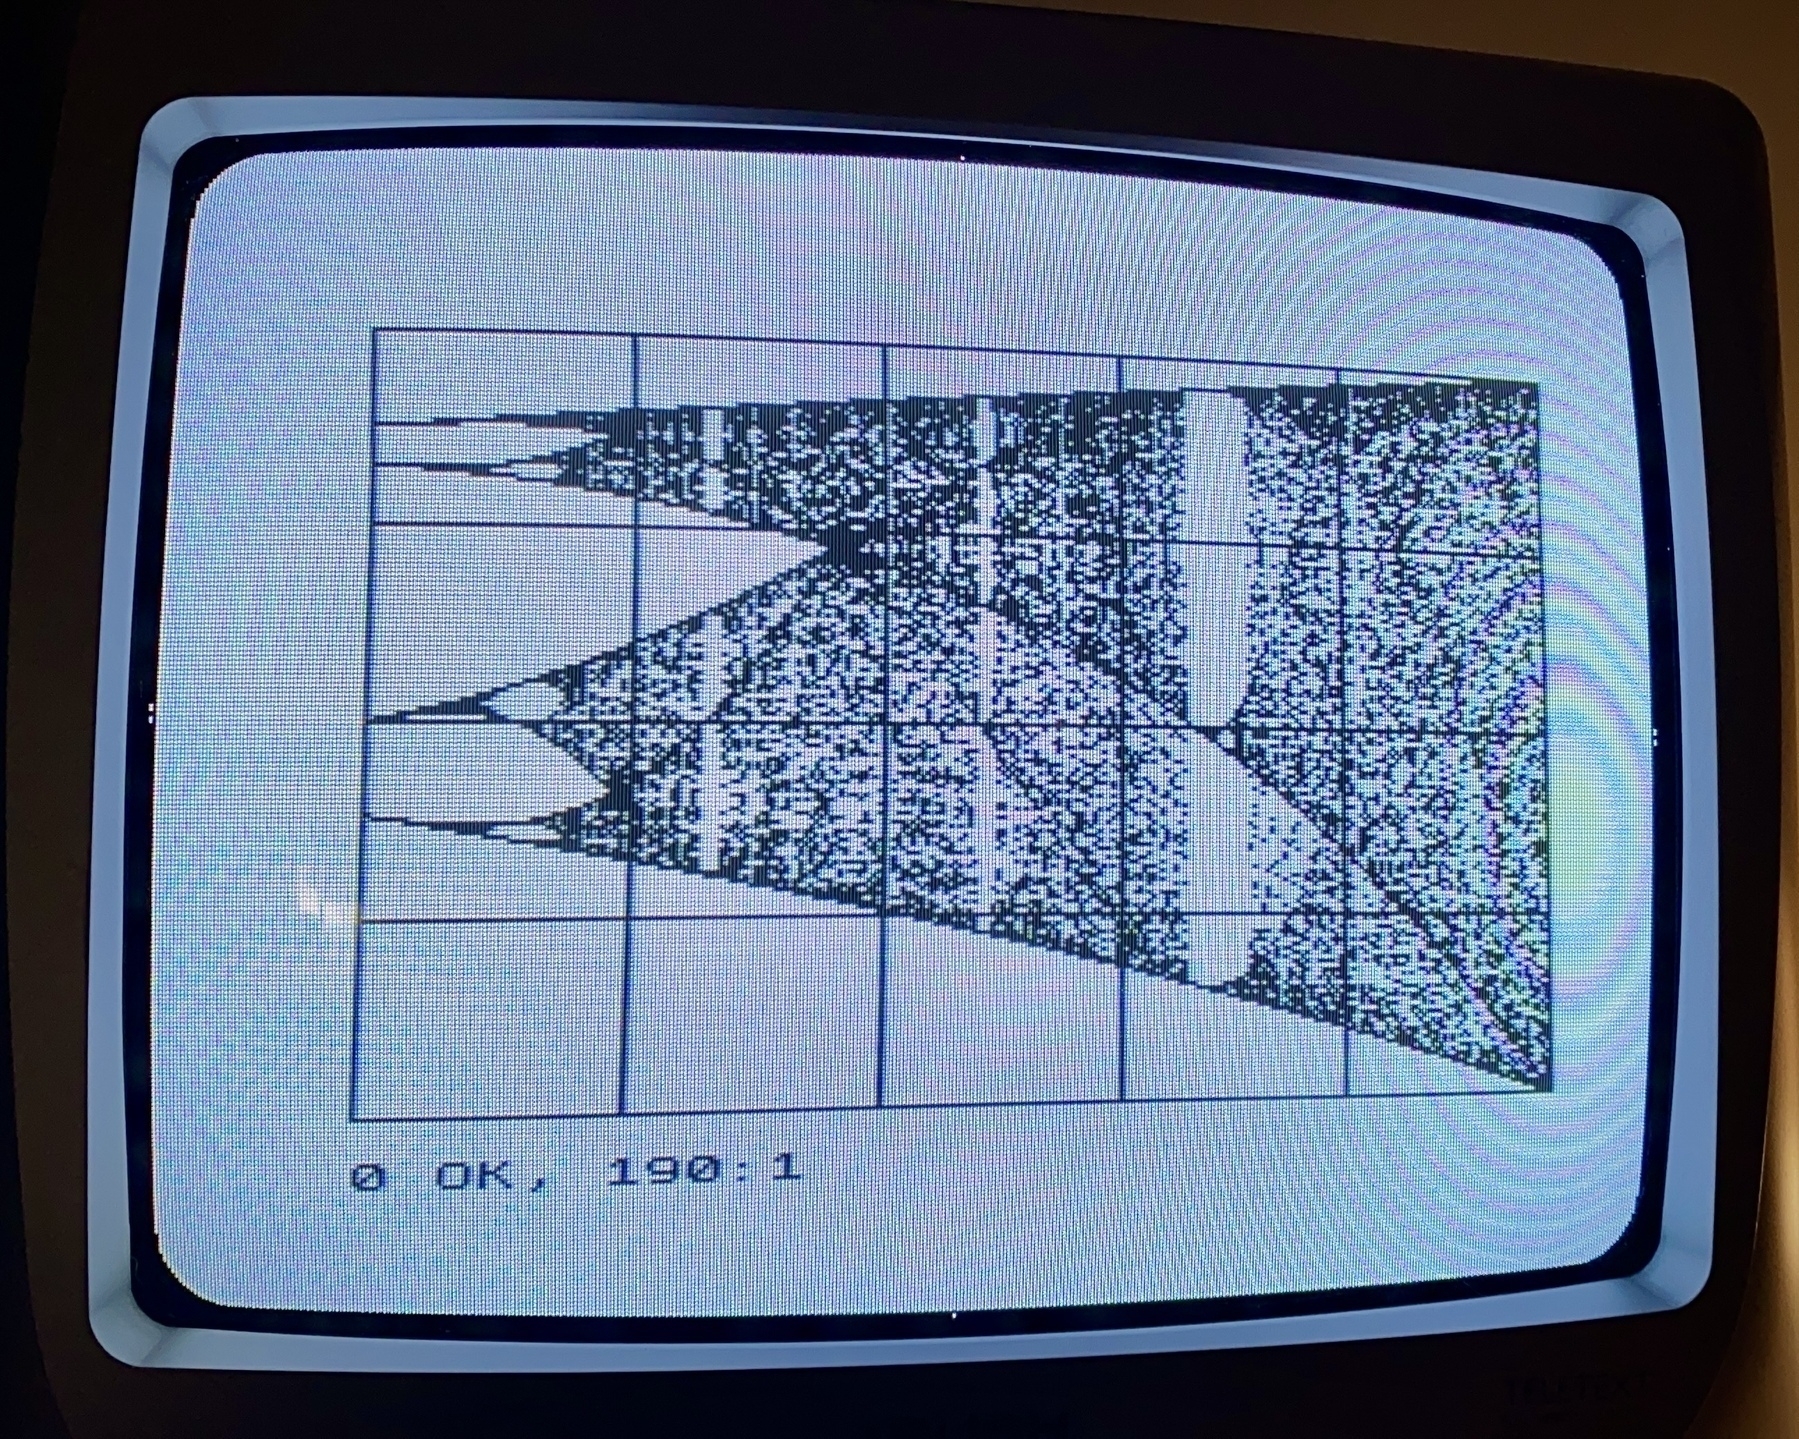 Photograph of a CRT telly displaying a Feigenbaum constant bifurcation diagram generated by a ZX Spectrum